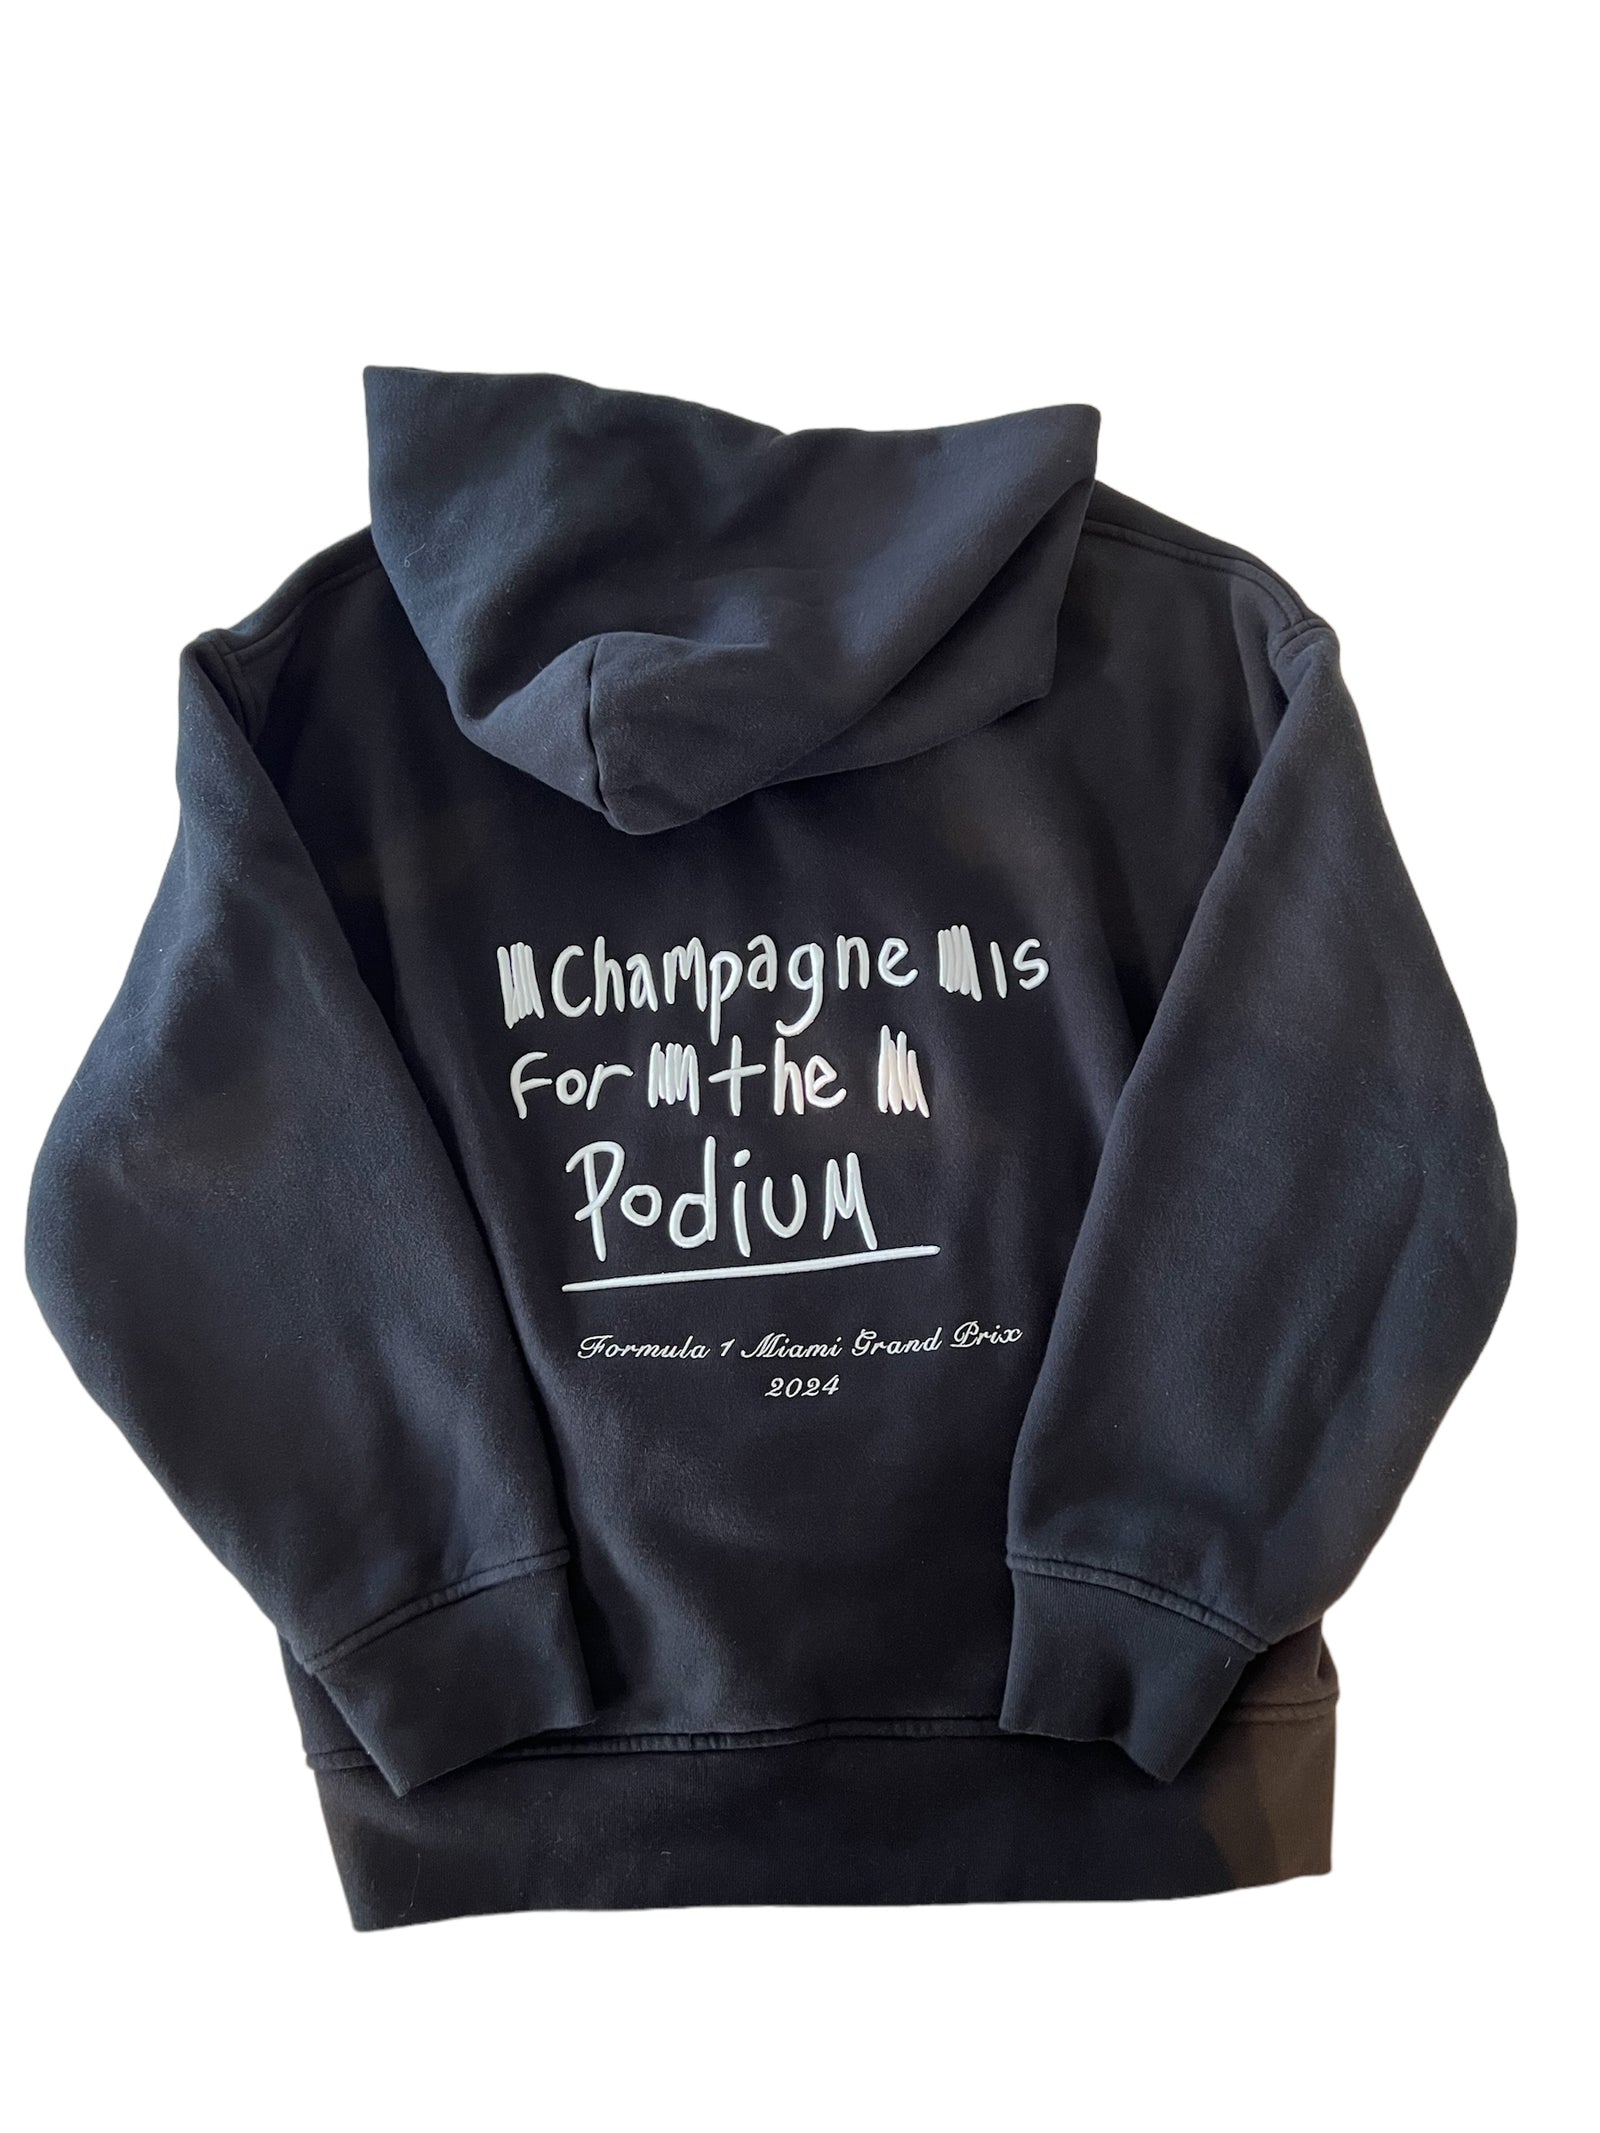 Champagne is for the podium - Winners hoodie